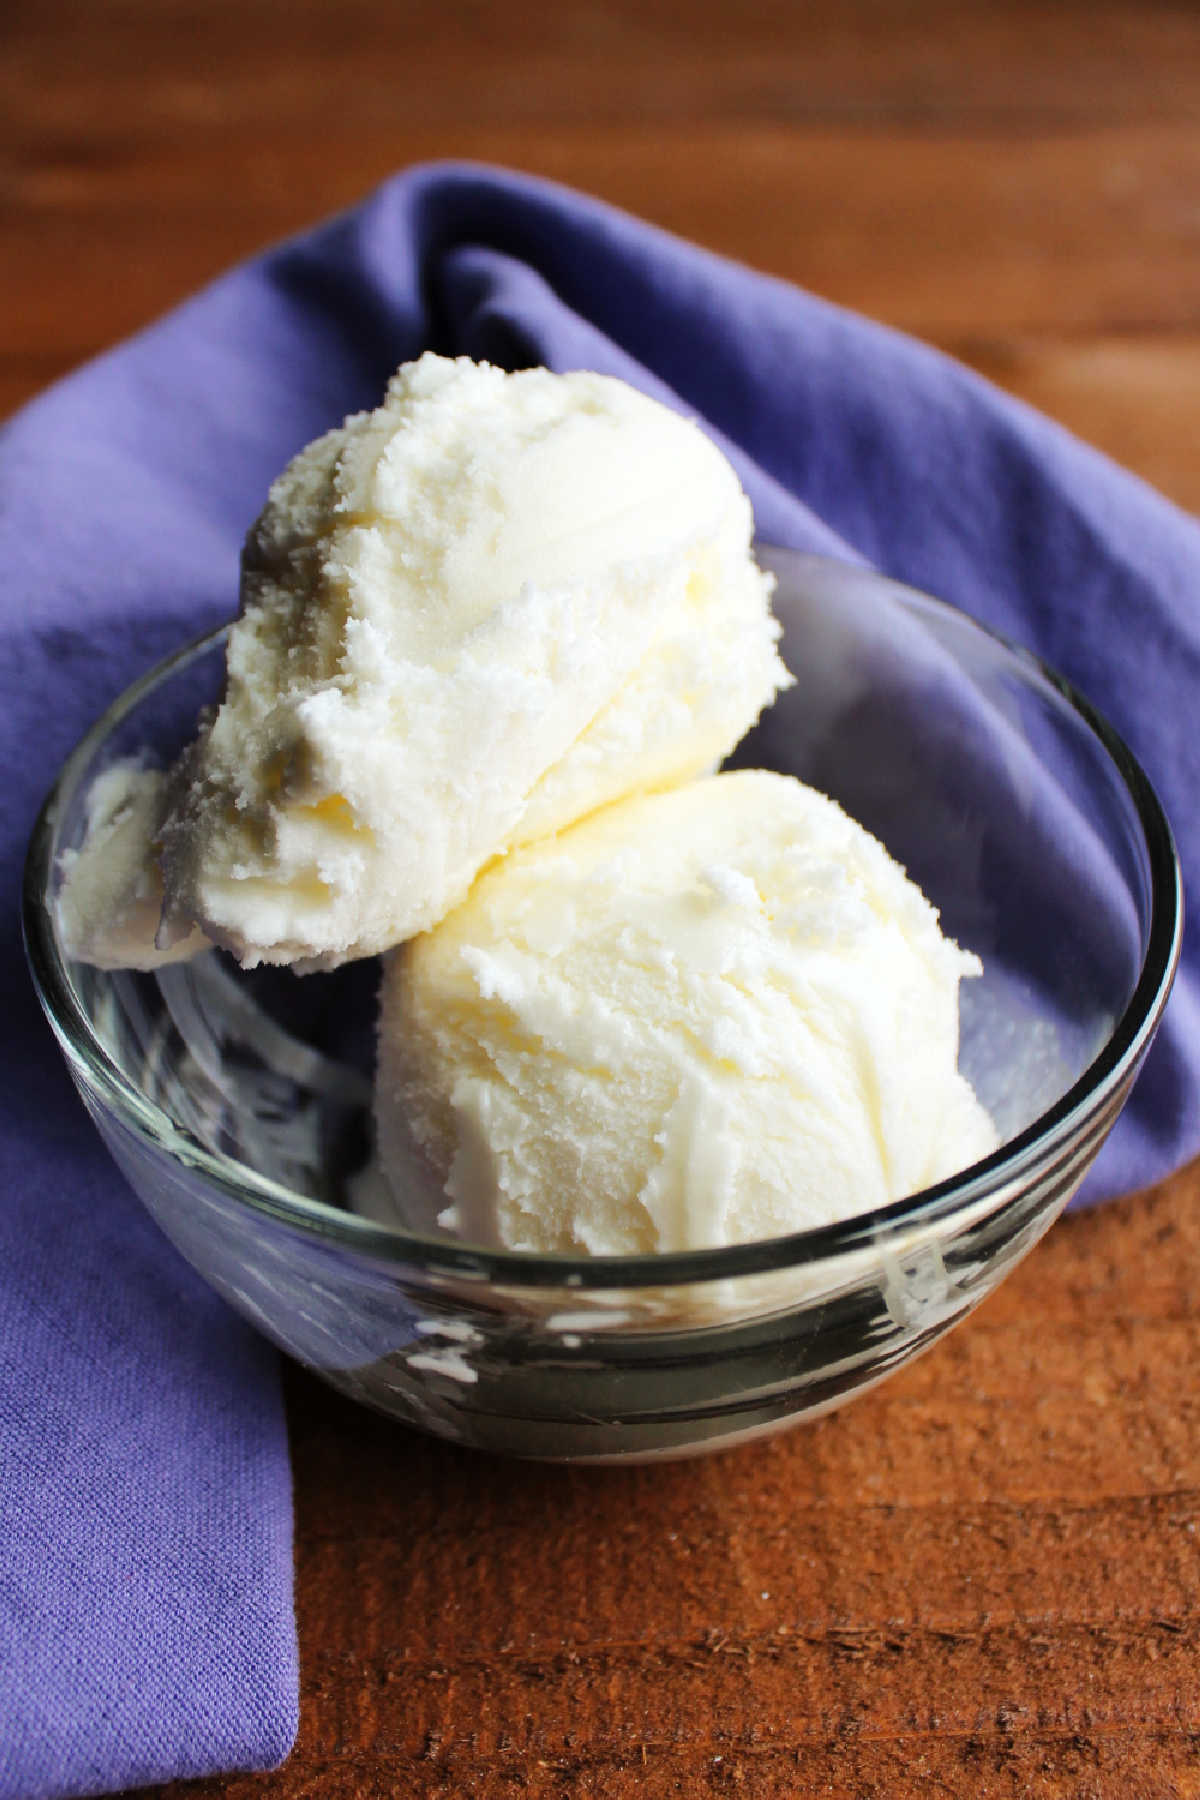 Glass bowl with two scoops of vanilla ice cream inside.